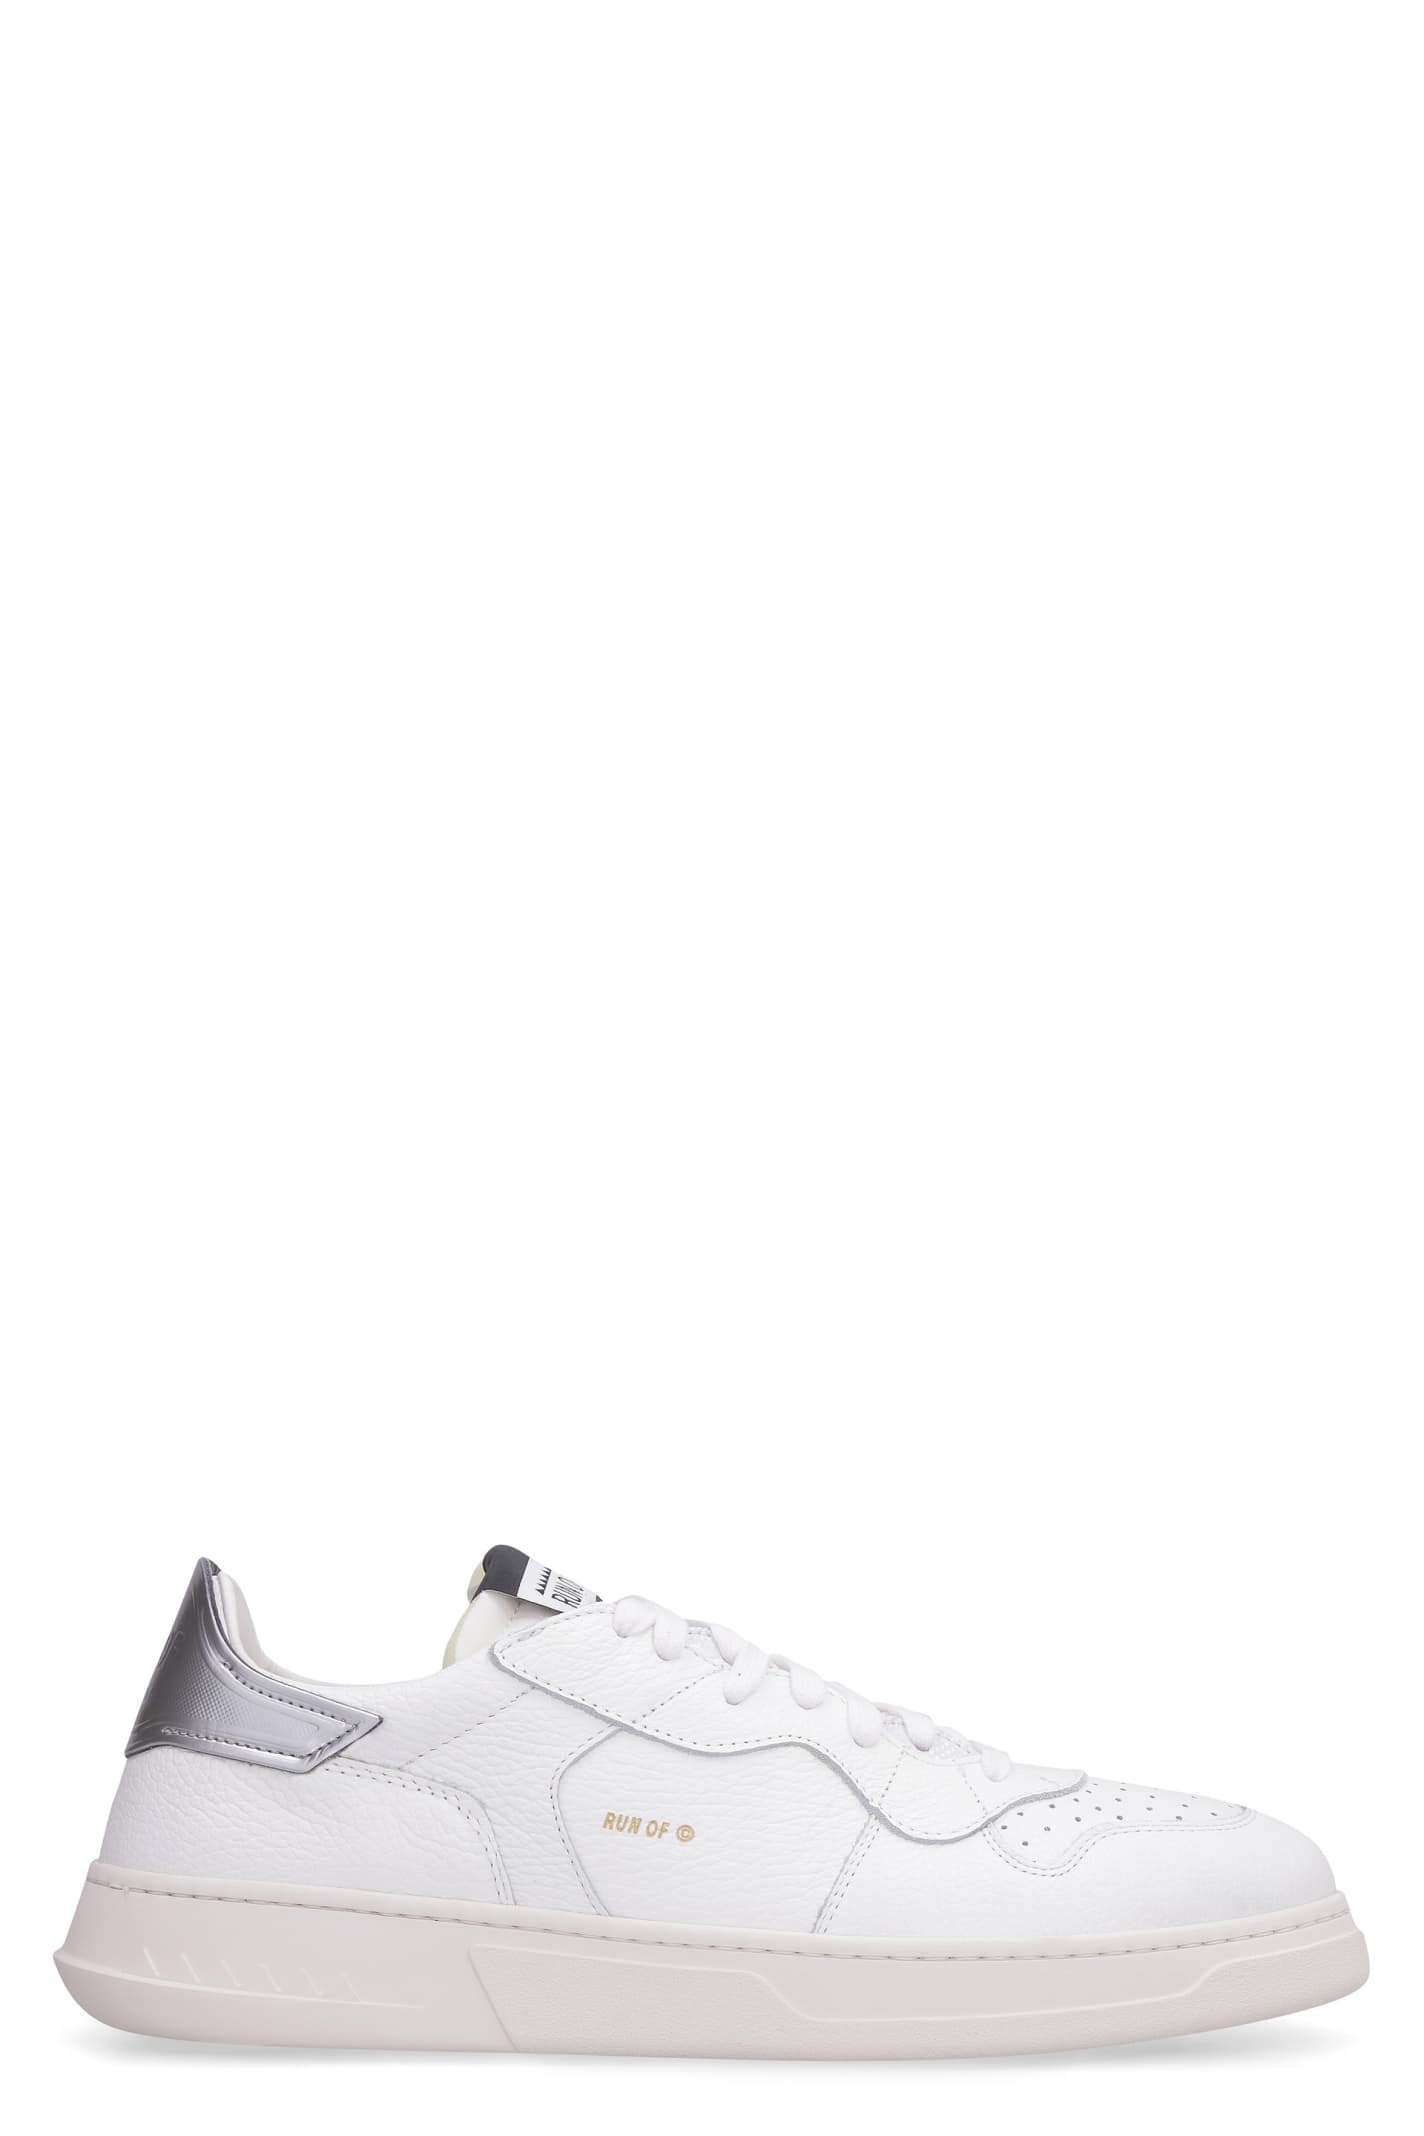 RUN OF Class-s Leather Low-top Sneakers